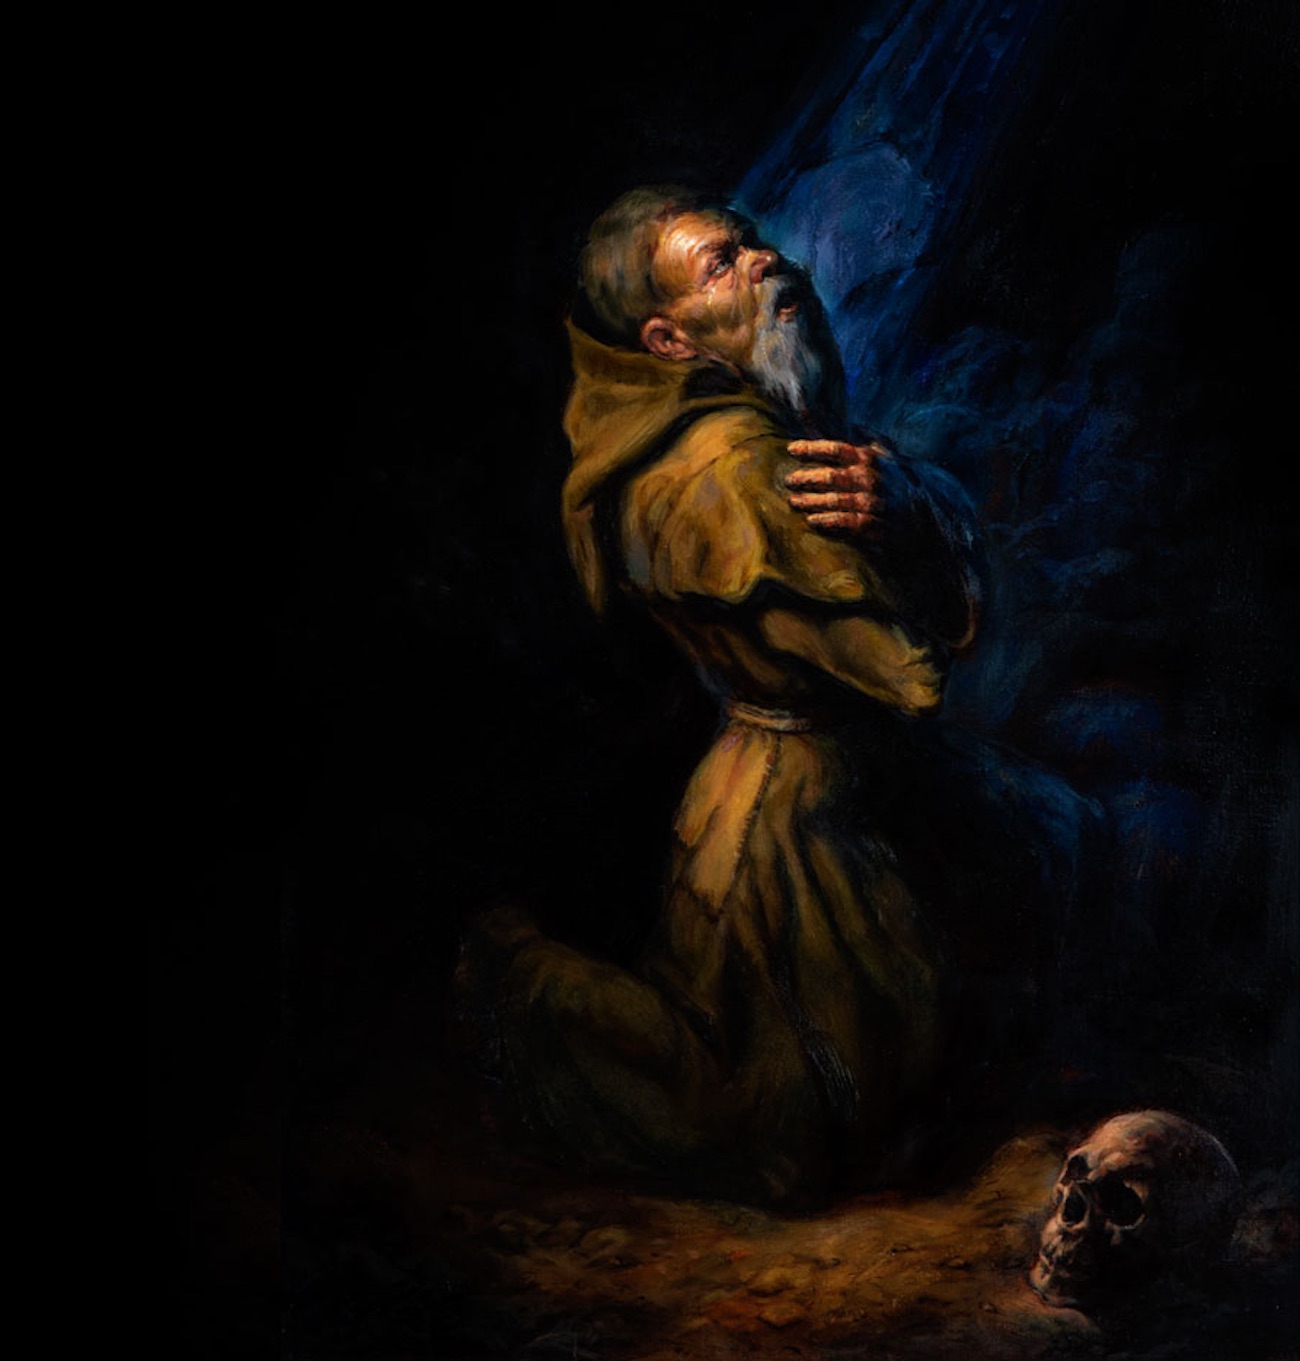 Monk artwork from the gothic thriller Cryptica by Paul Laane